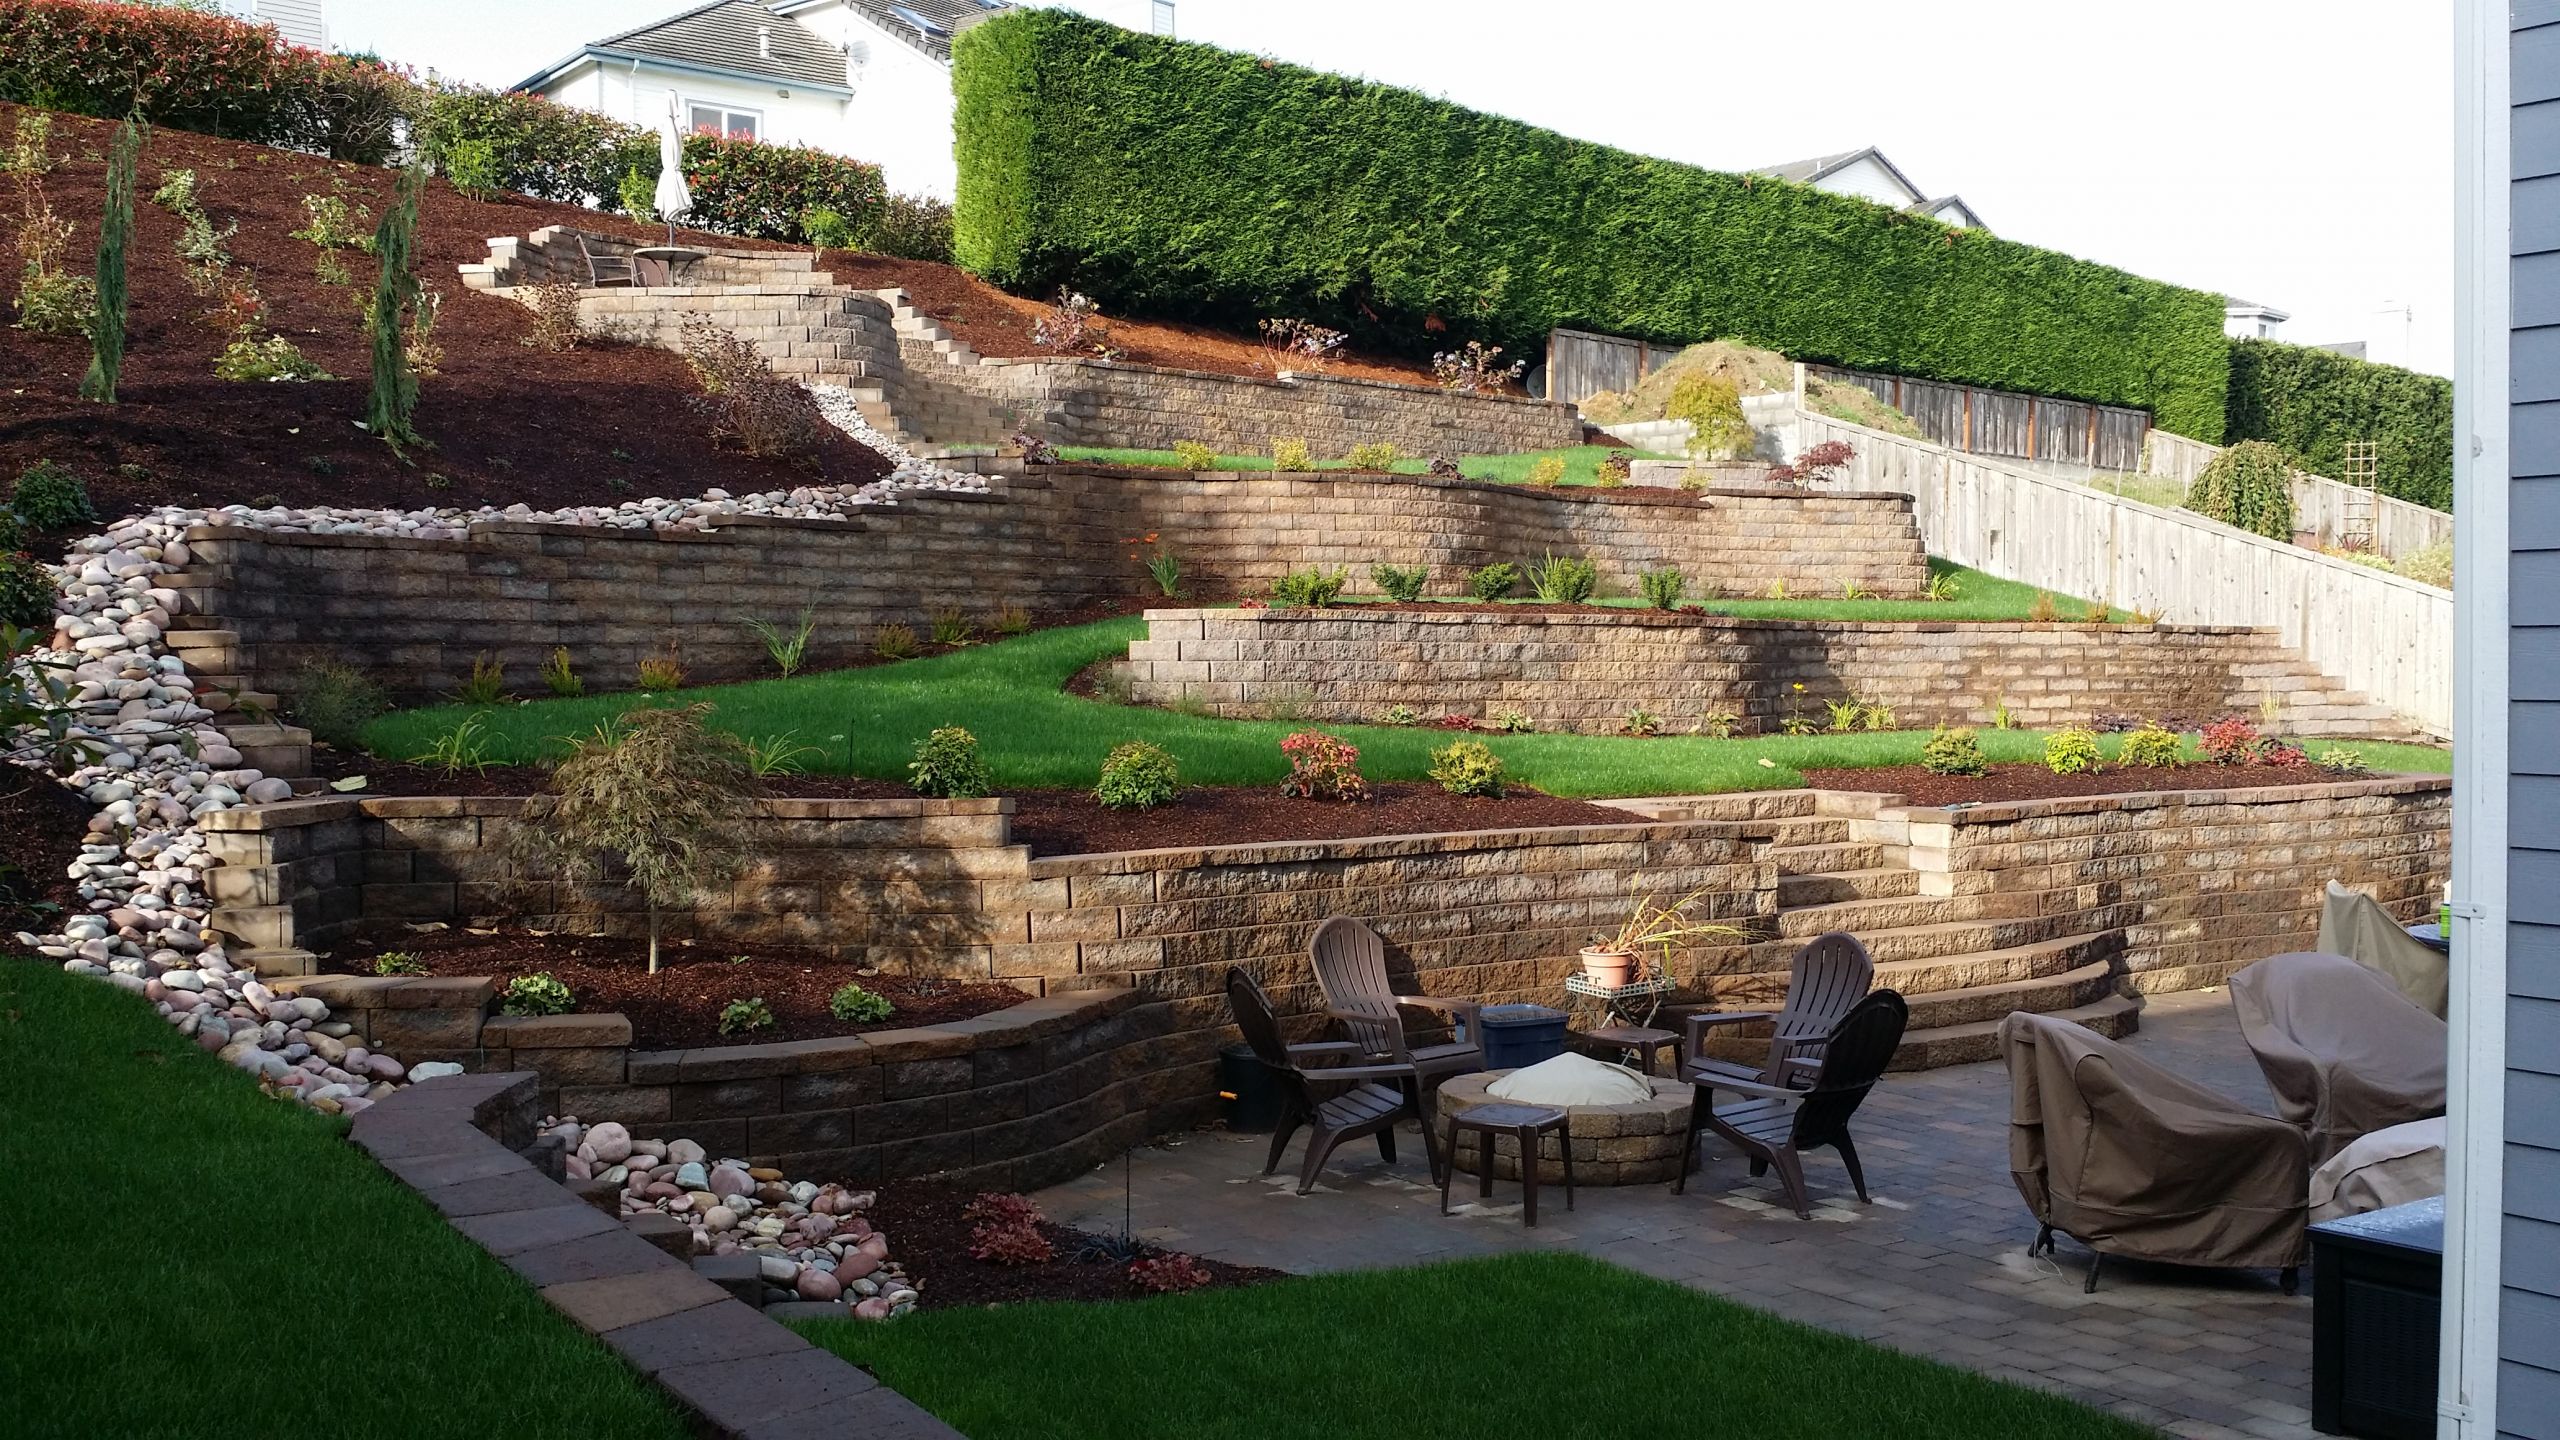 Terrace Landscape Retaining Wall
 Make an Ugly Hillside Beautiful with Retaining Walls